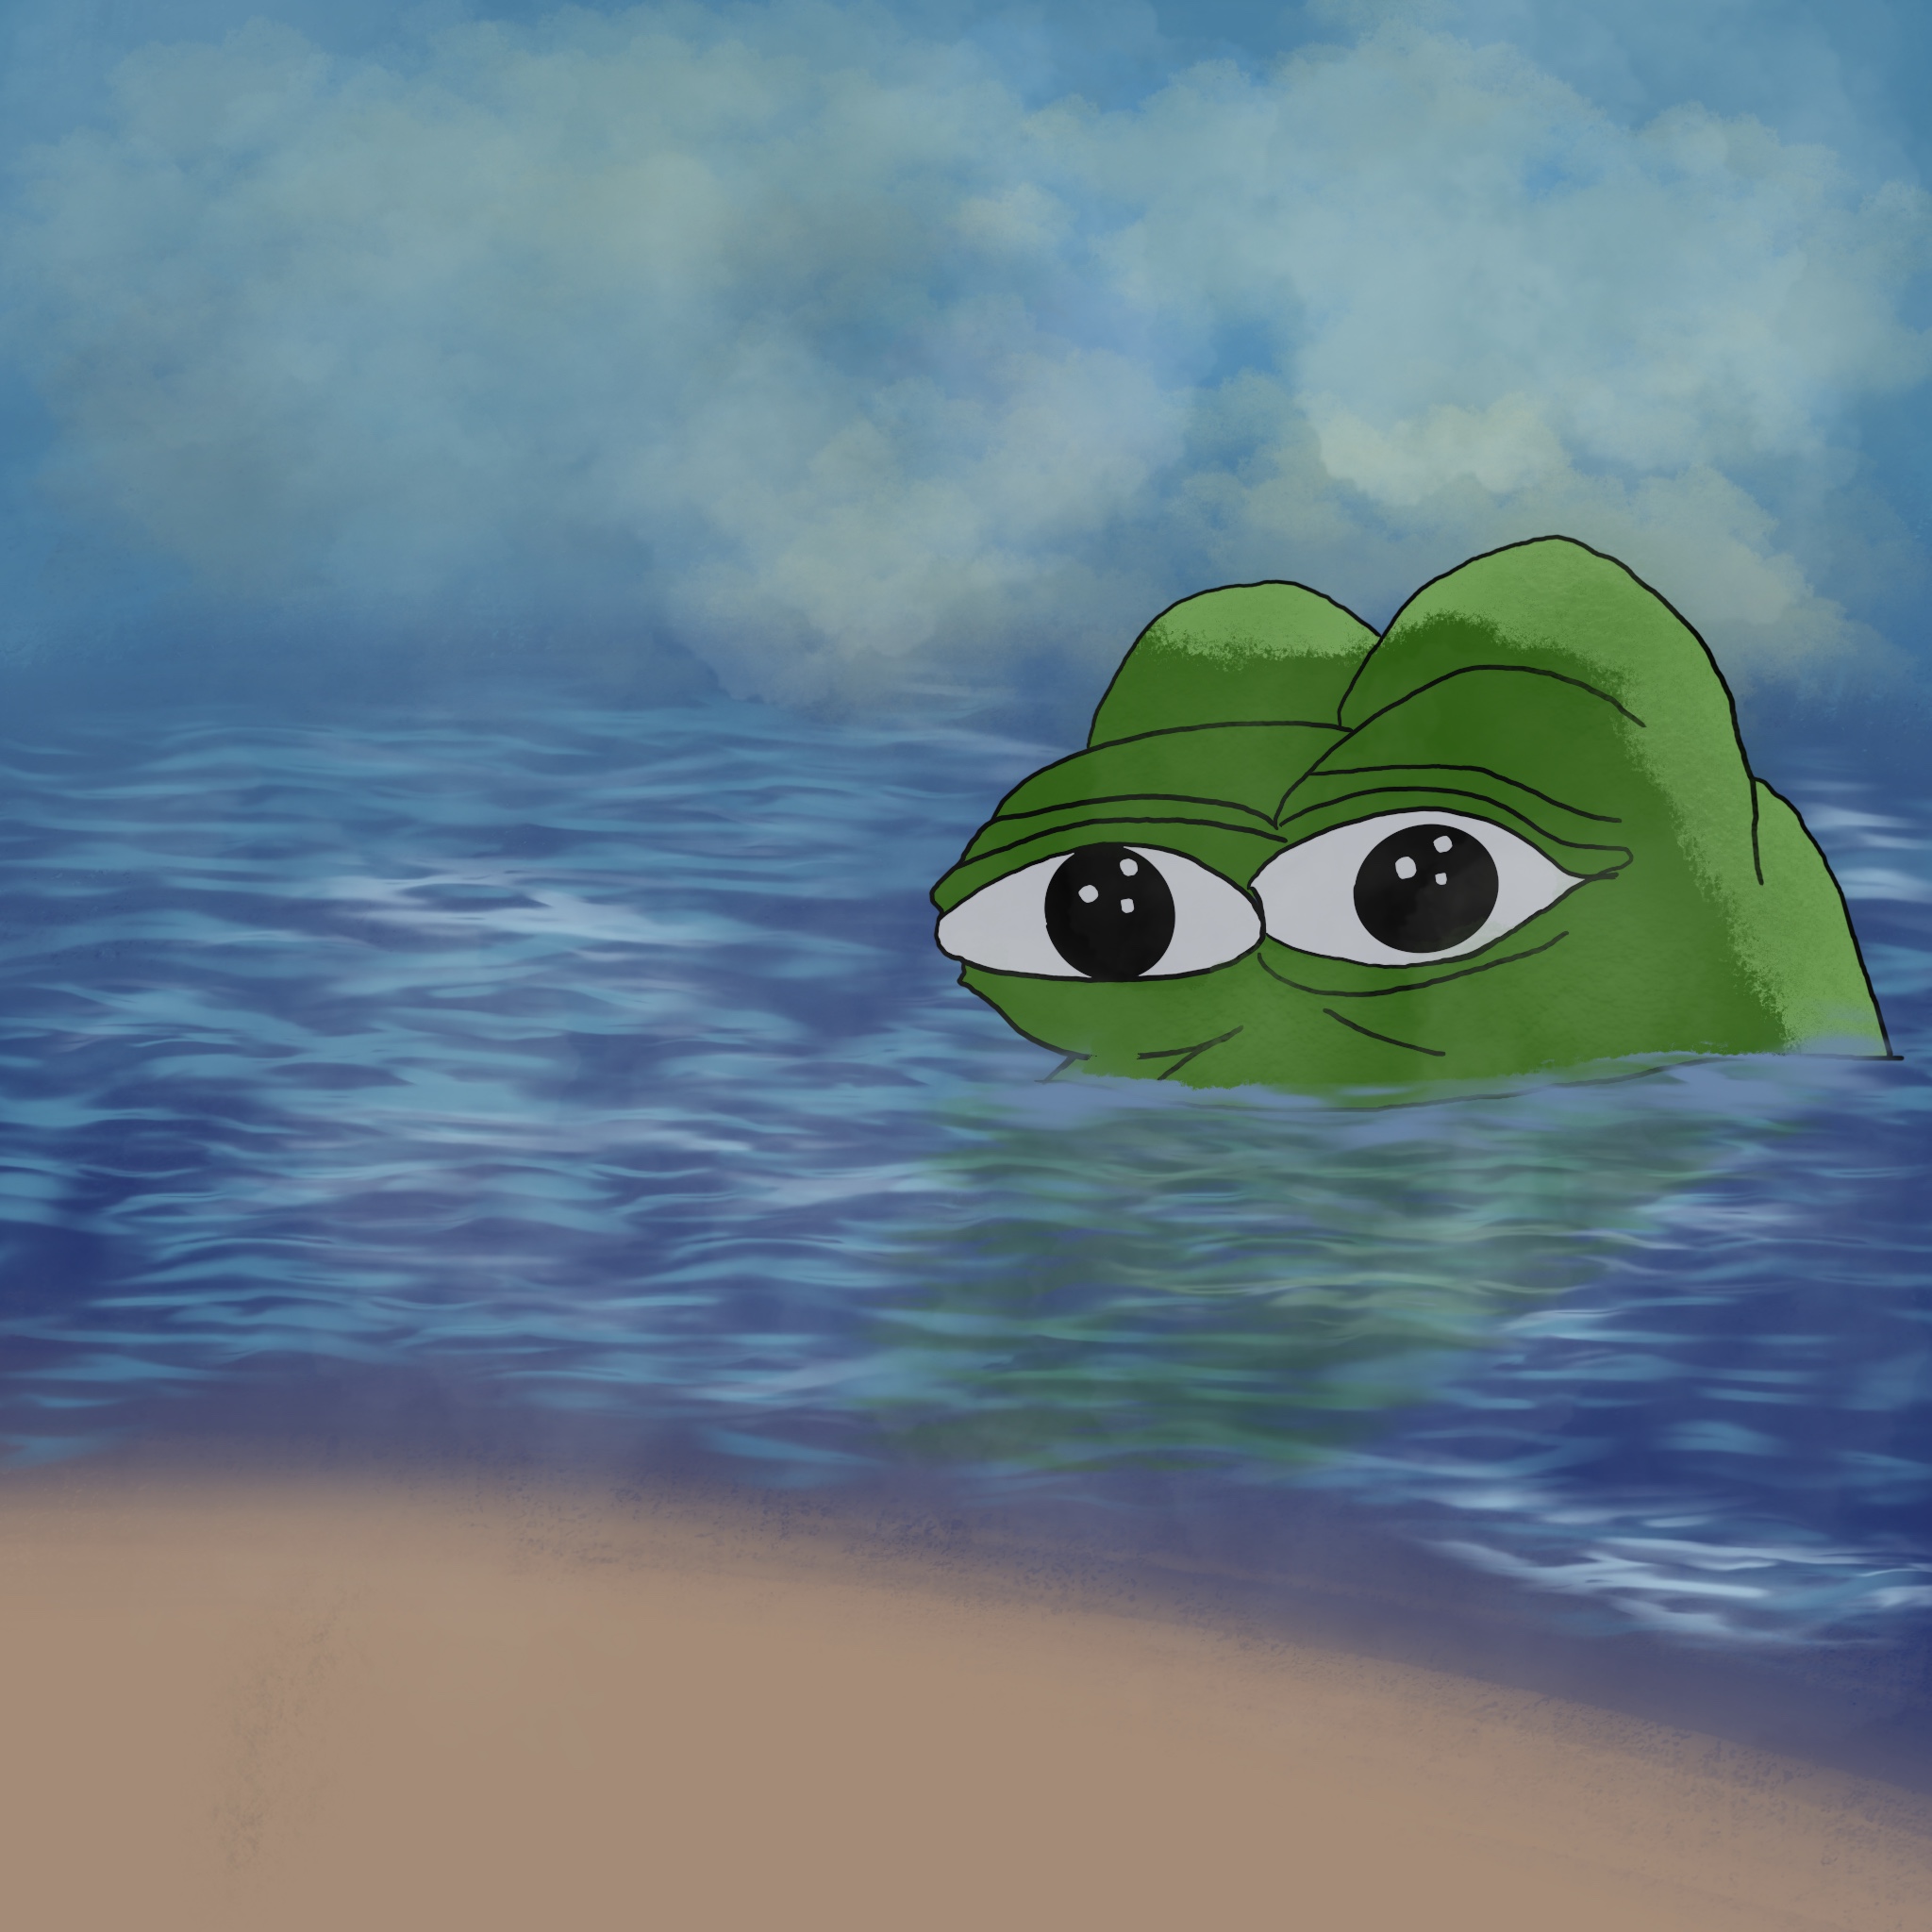 pepe surfacing, will he save us or fight us?